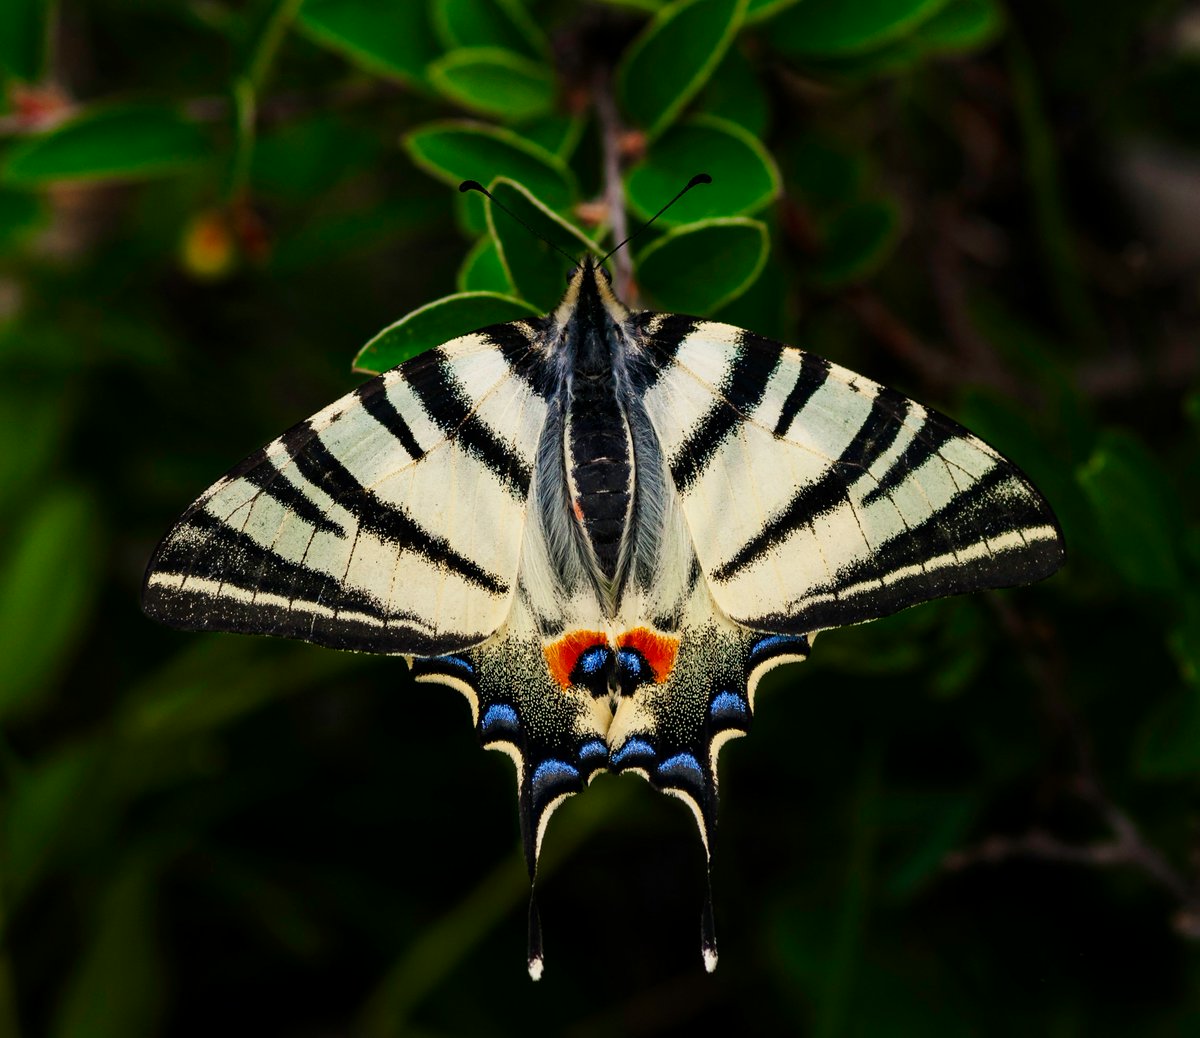 Look at the stunning detail of this tiger swallowtail butterfly! Macro photography allows us to appreciate the intricate beauty of the natural world. 🦋 #macrophotography #nature #getoutside #insects